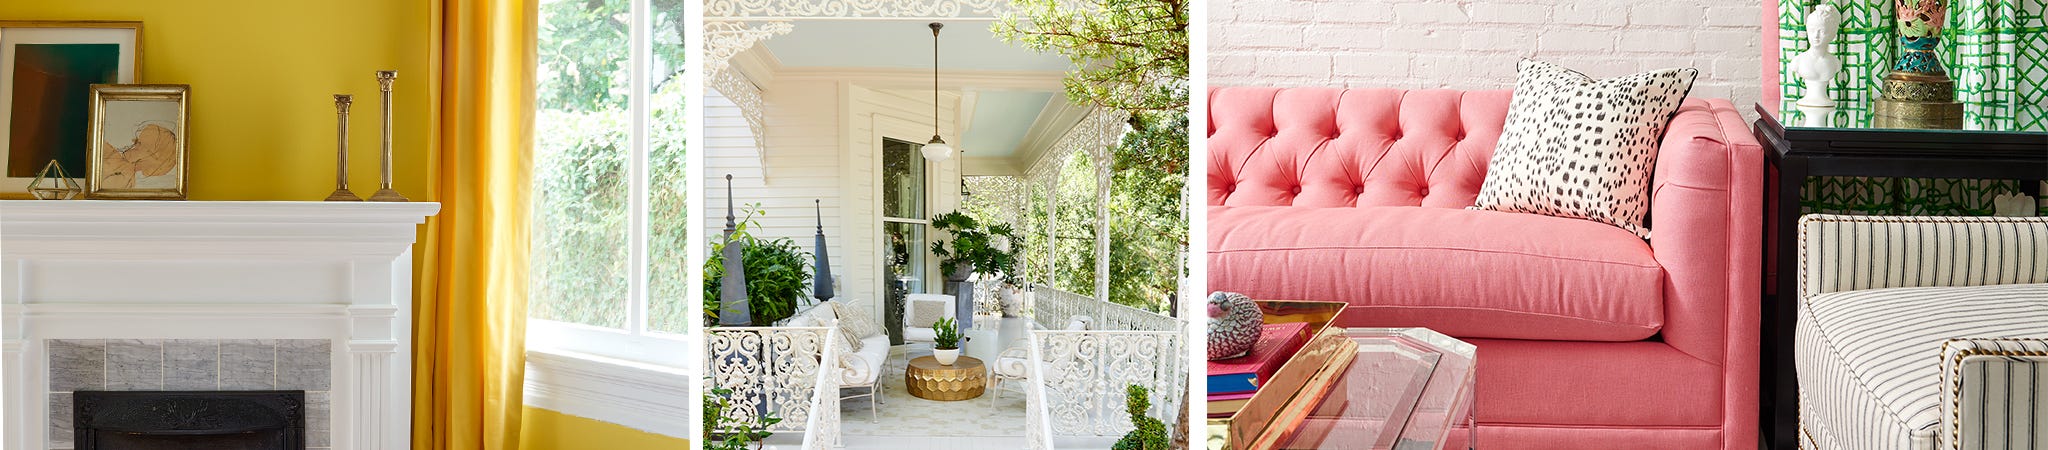 House Tour: Southern Tradition Meets Modern Comfort - Cottag